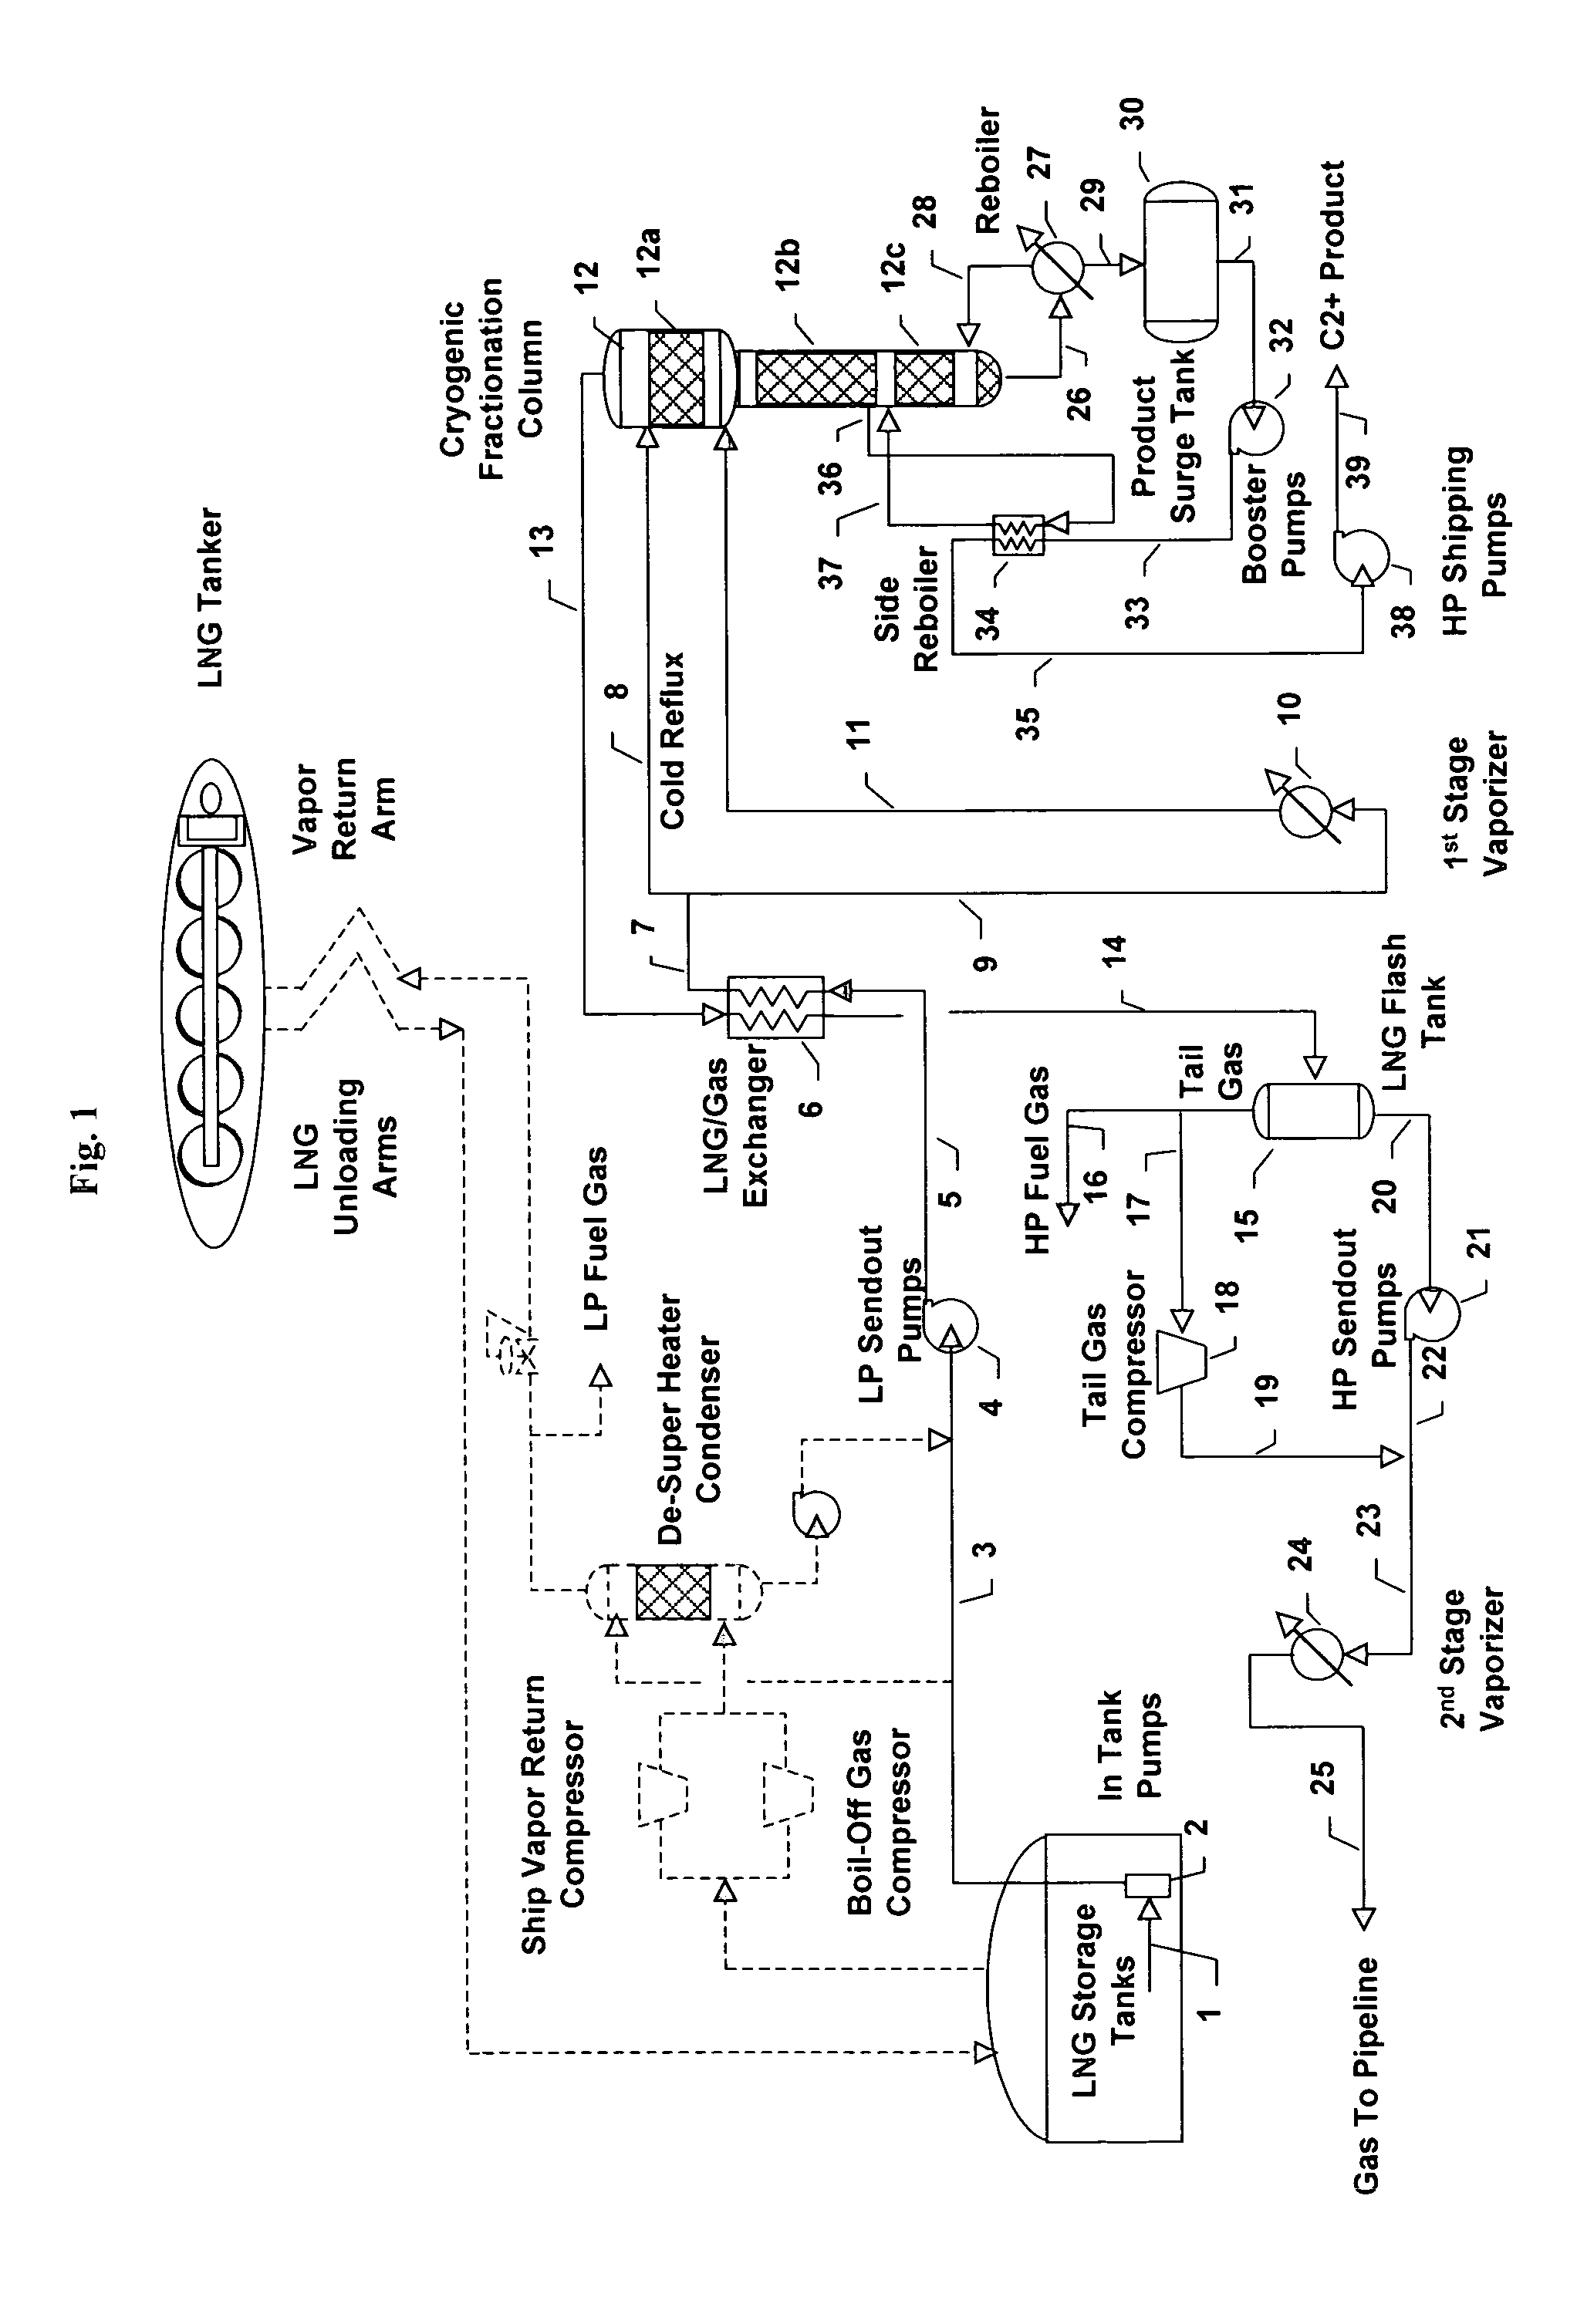 Process for extracting ethane and heavier hydrocarbons from LNG